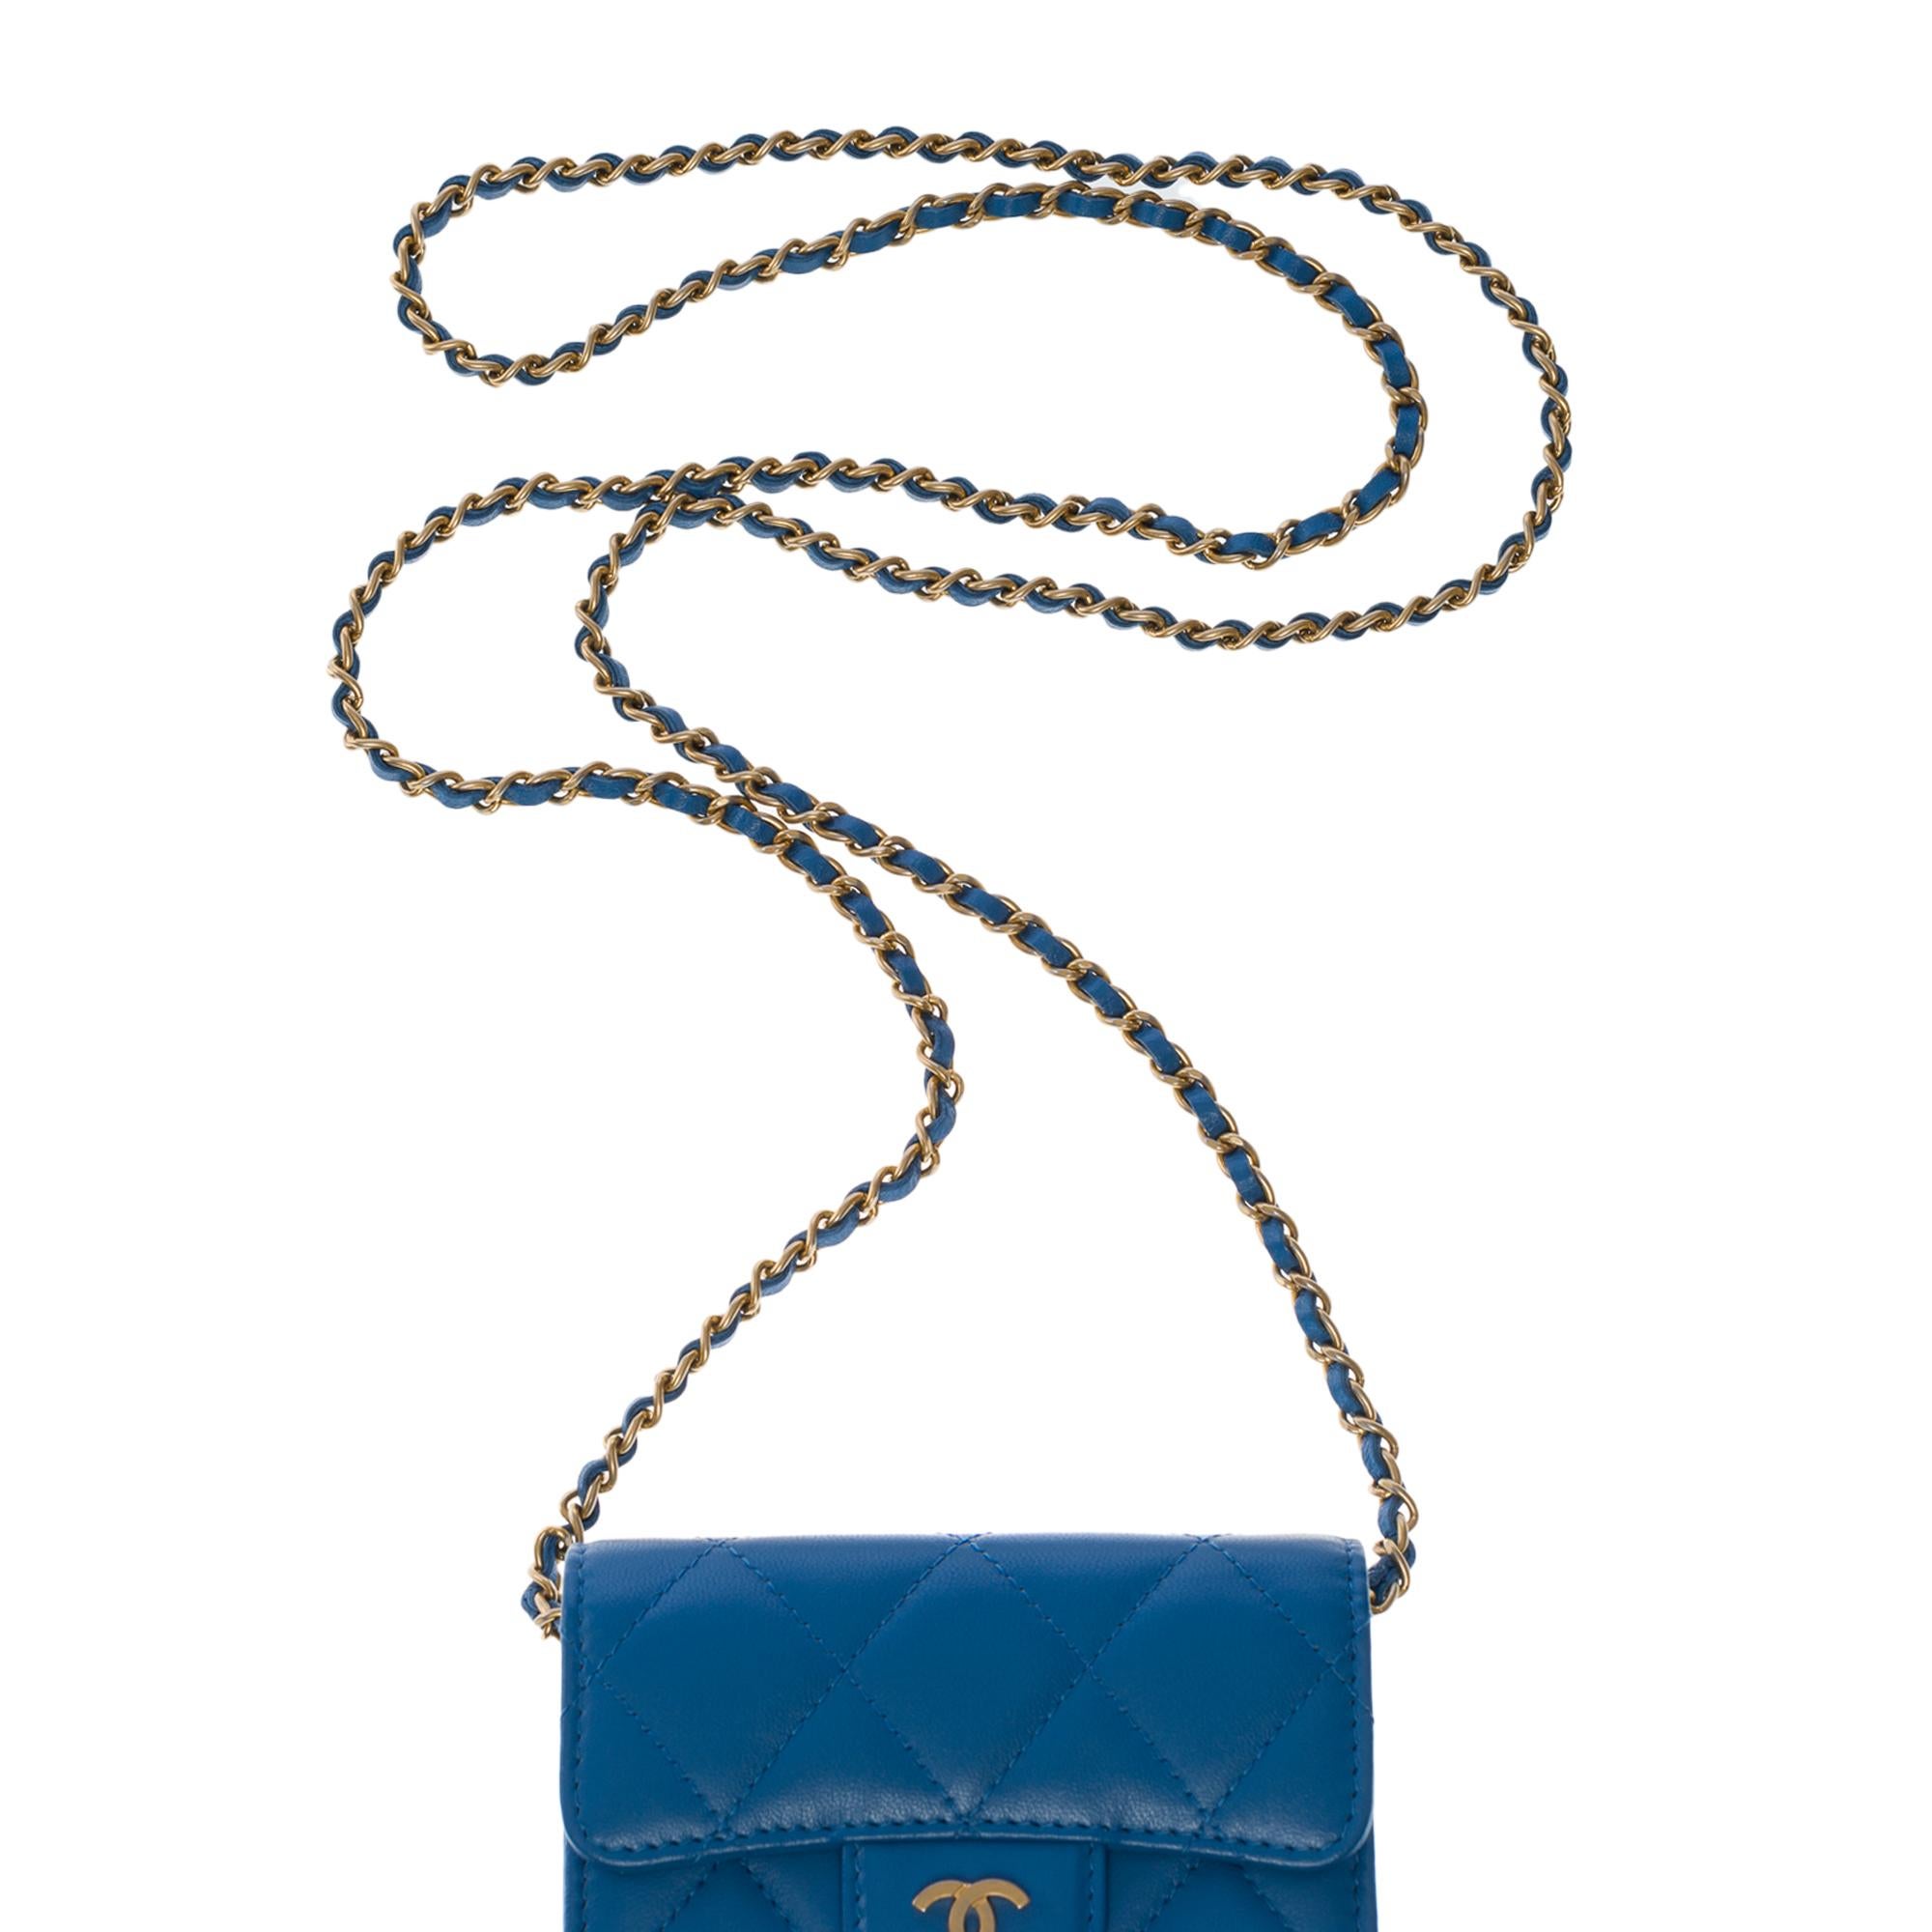 New Chanel Mini Wallet on Chain (WOC)  shoulder bag in blue quilted leather, GHW 5